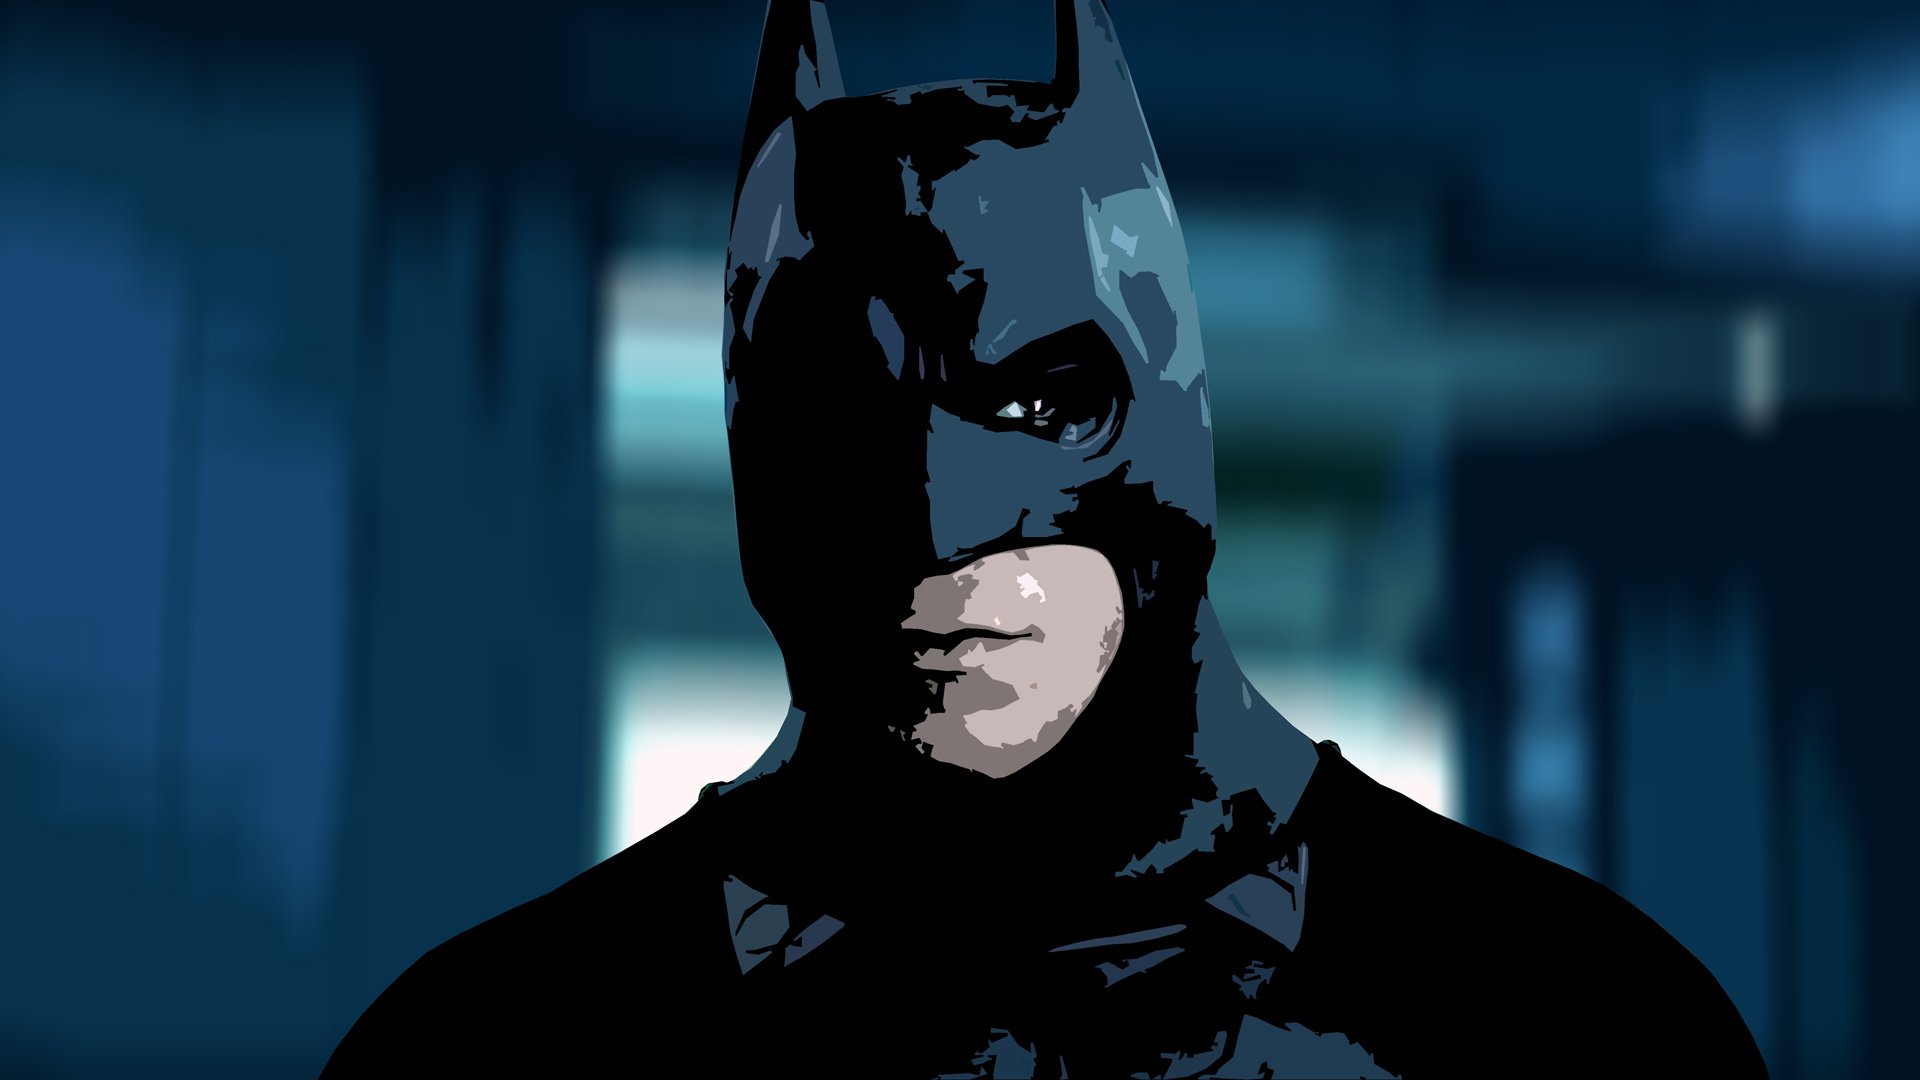 The Dark Knight download the last version for ios